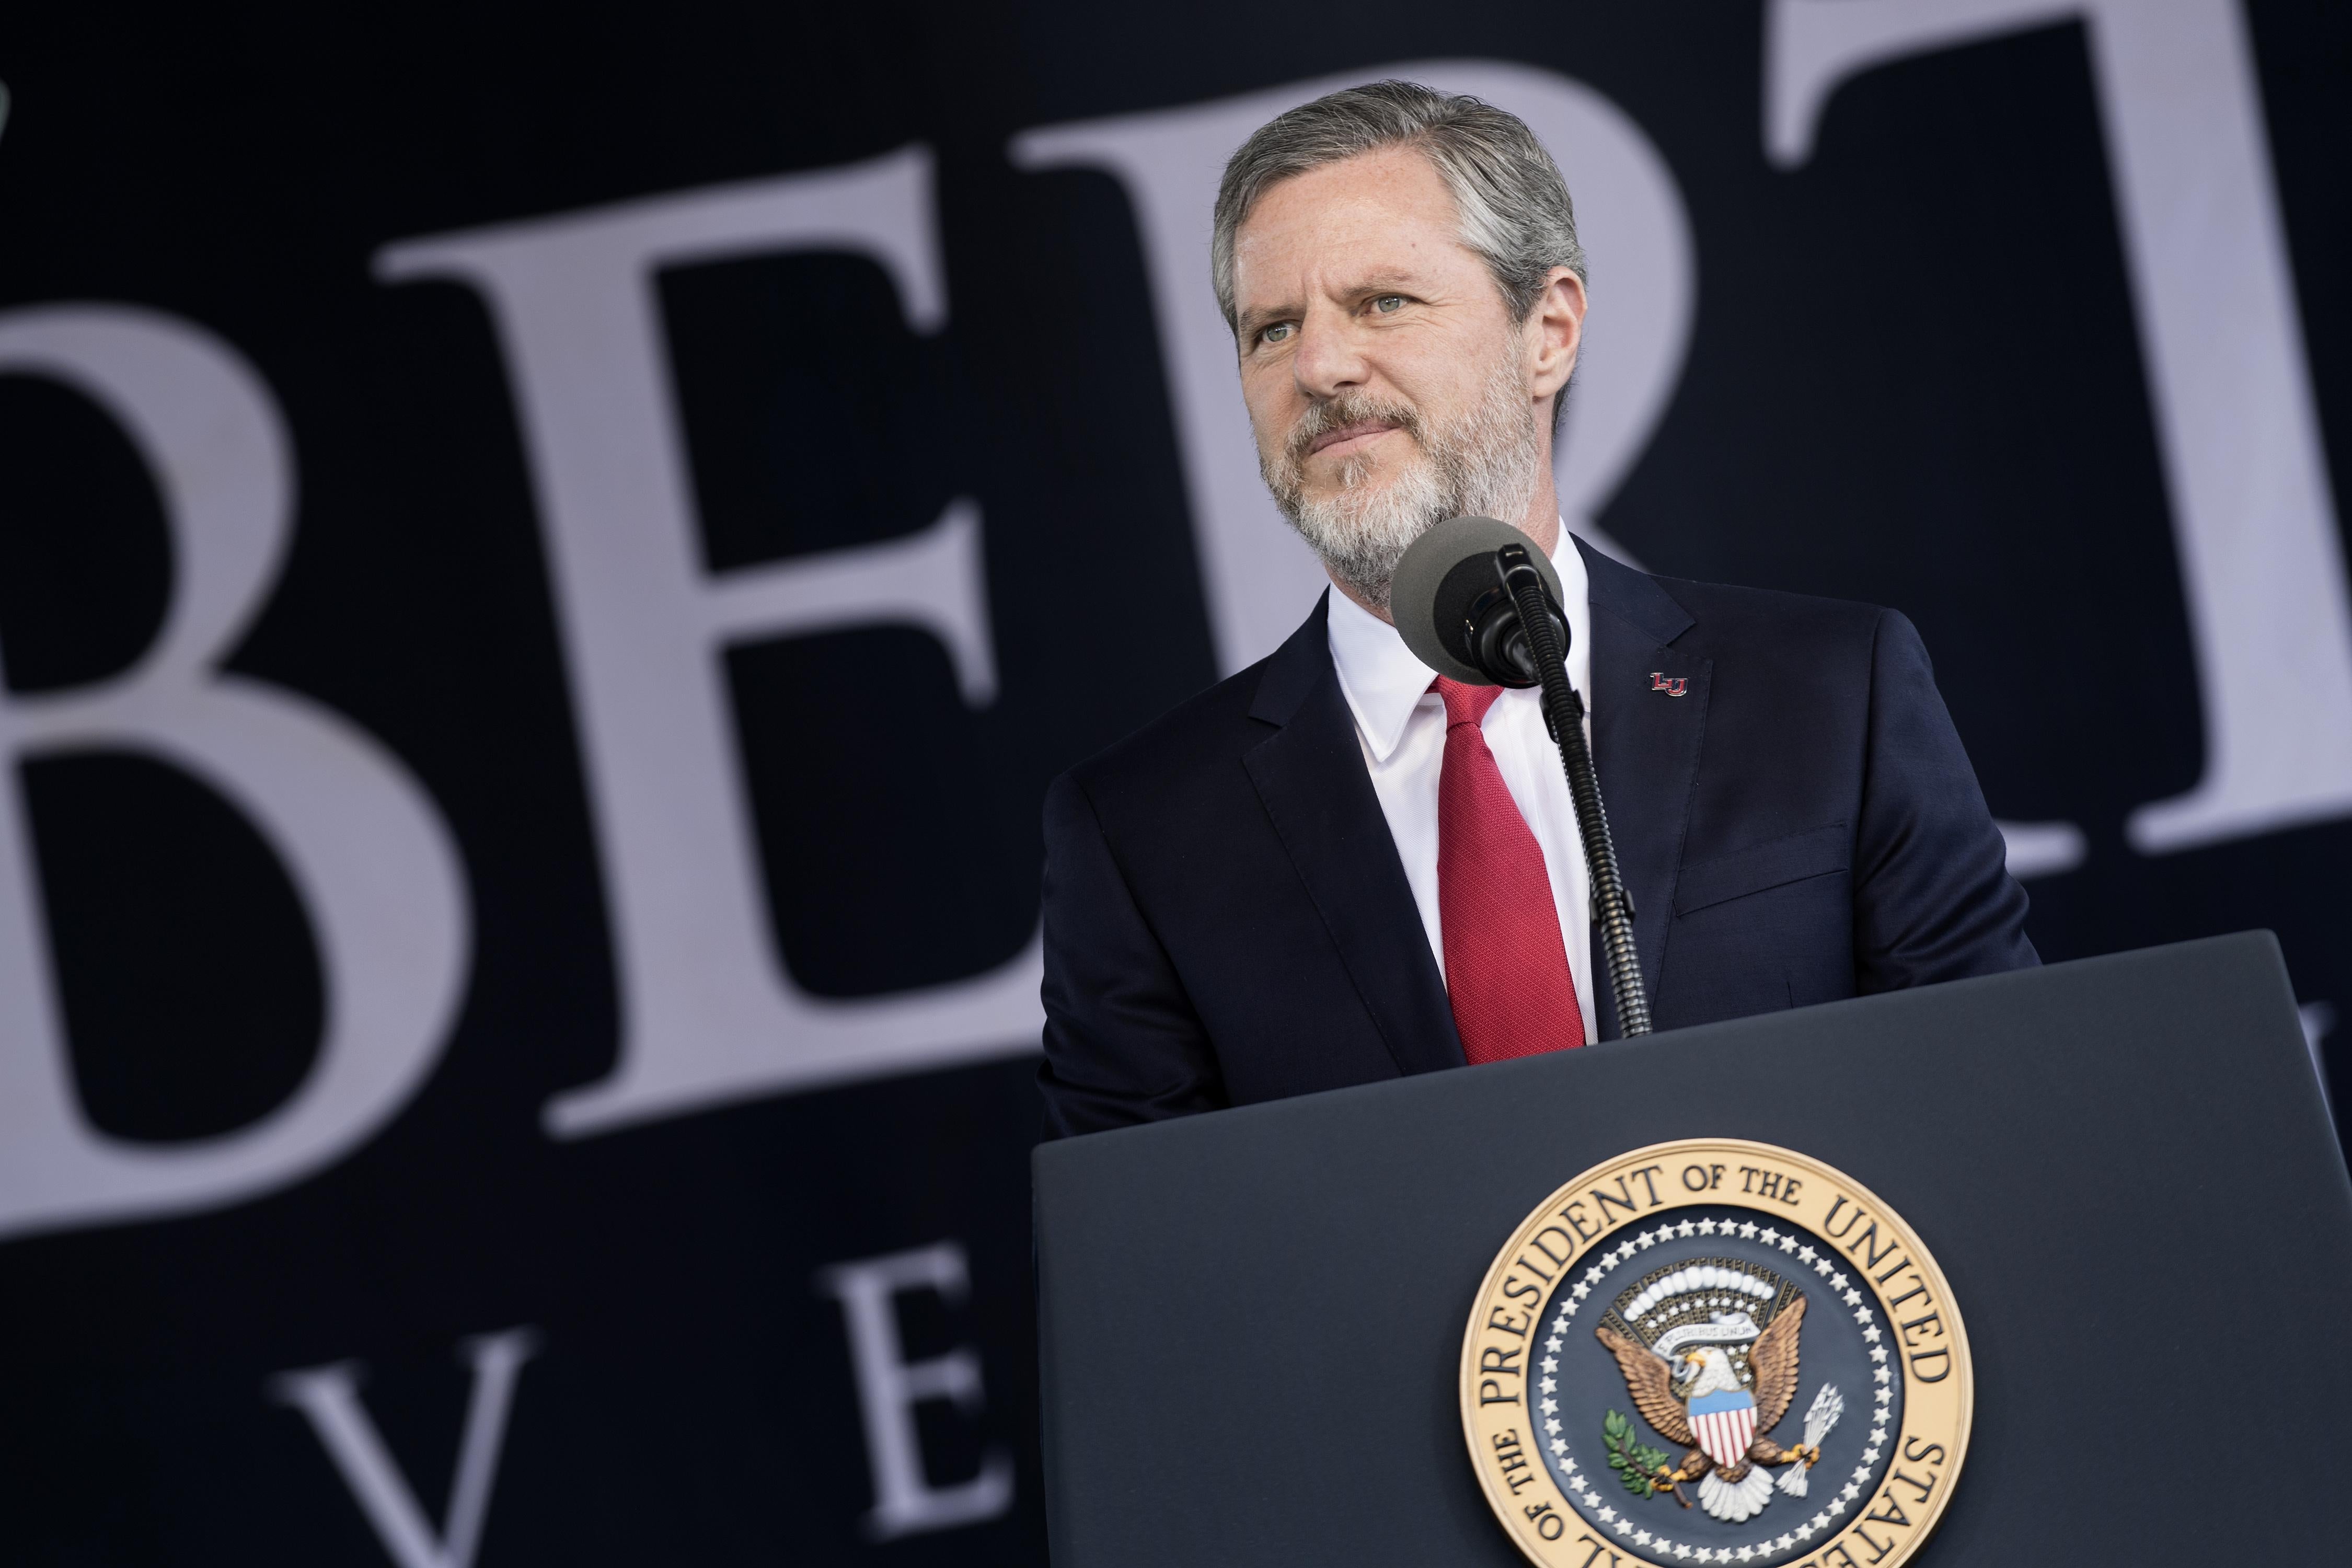 Falwell smiles, standing behind a podium bearing the U.S. presidential seal.